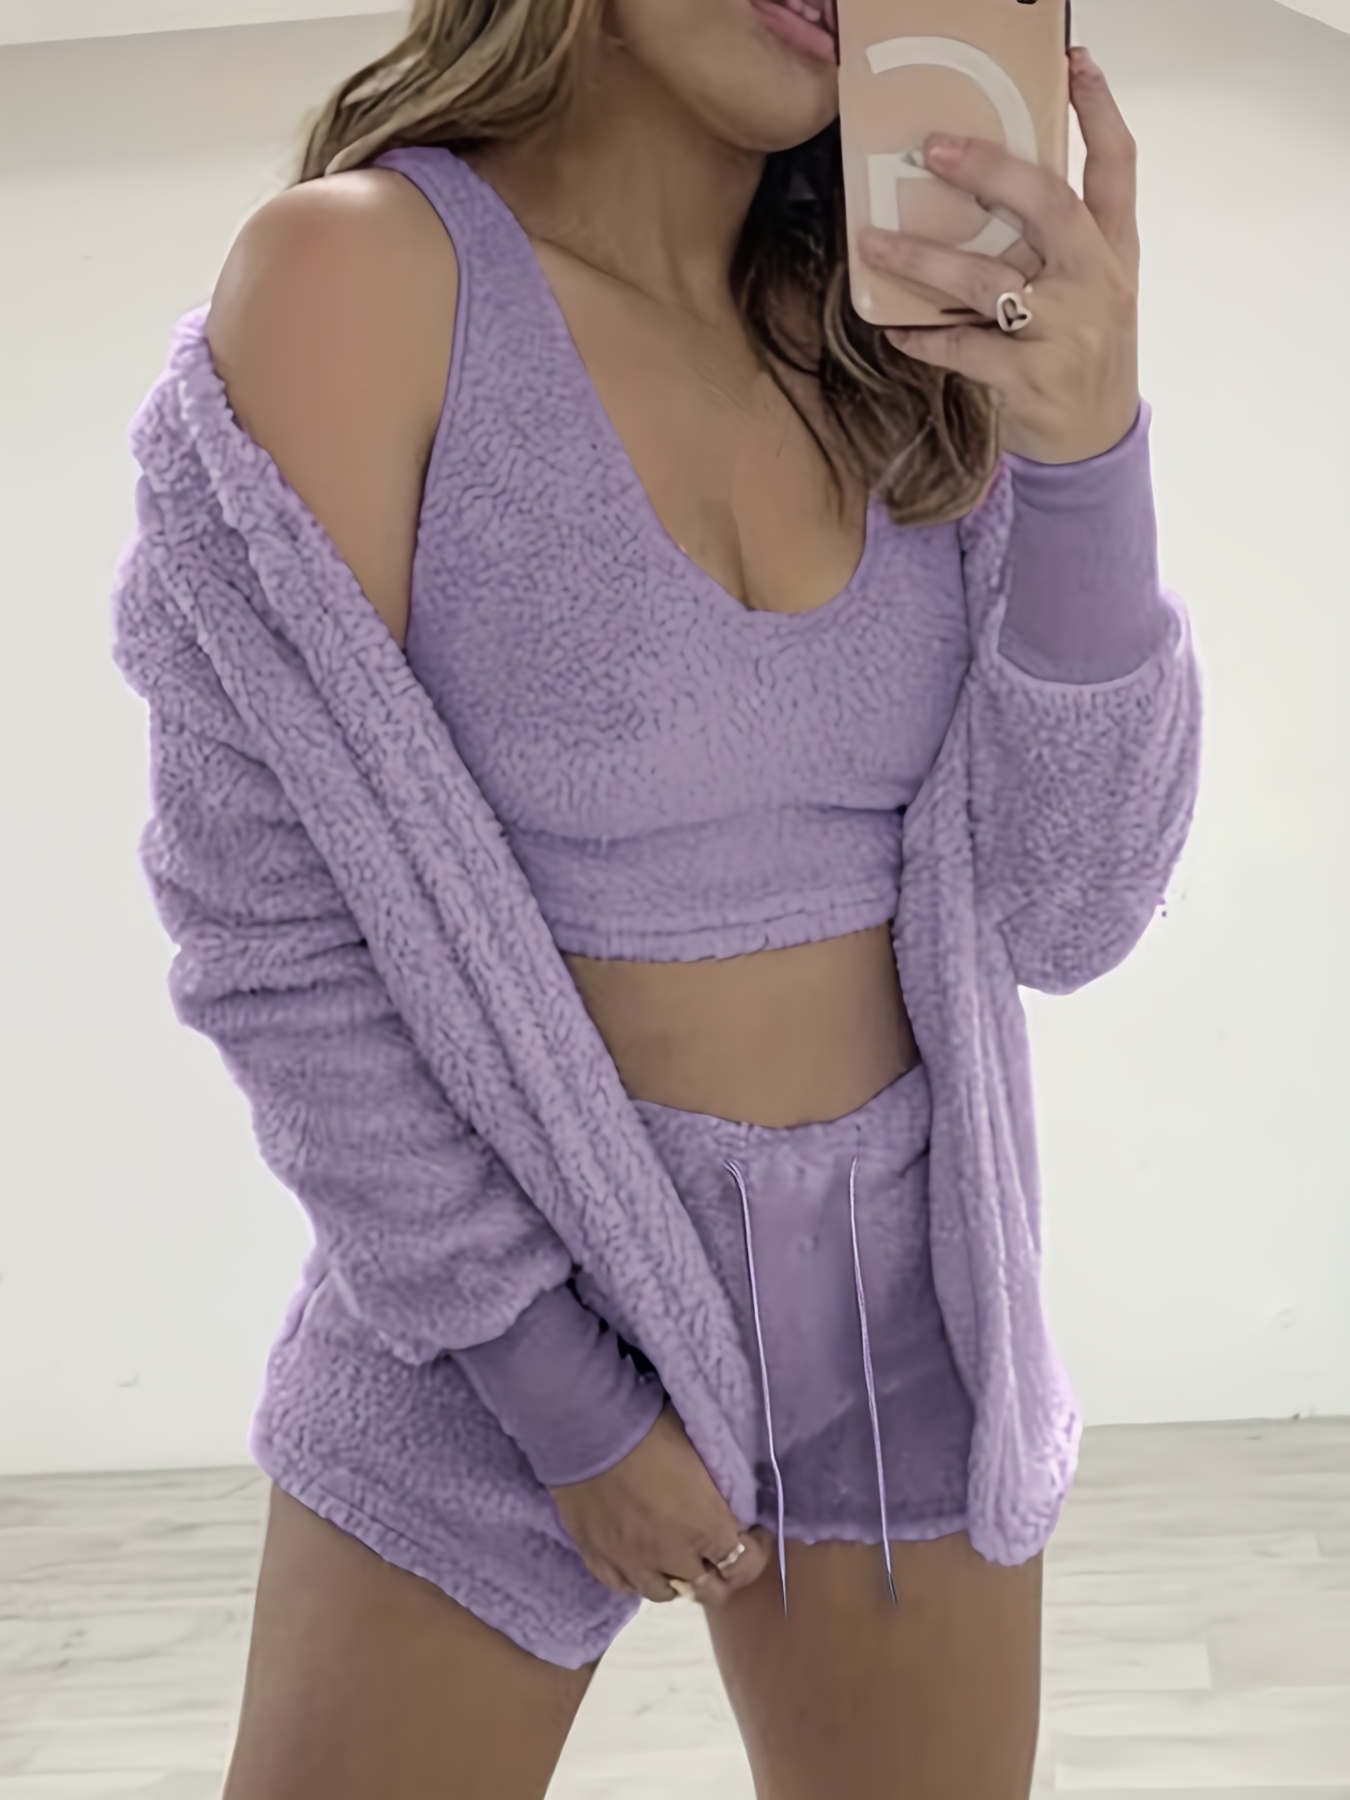 Hollister knit cami top in lavender floral - part of a set